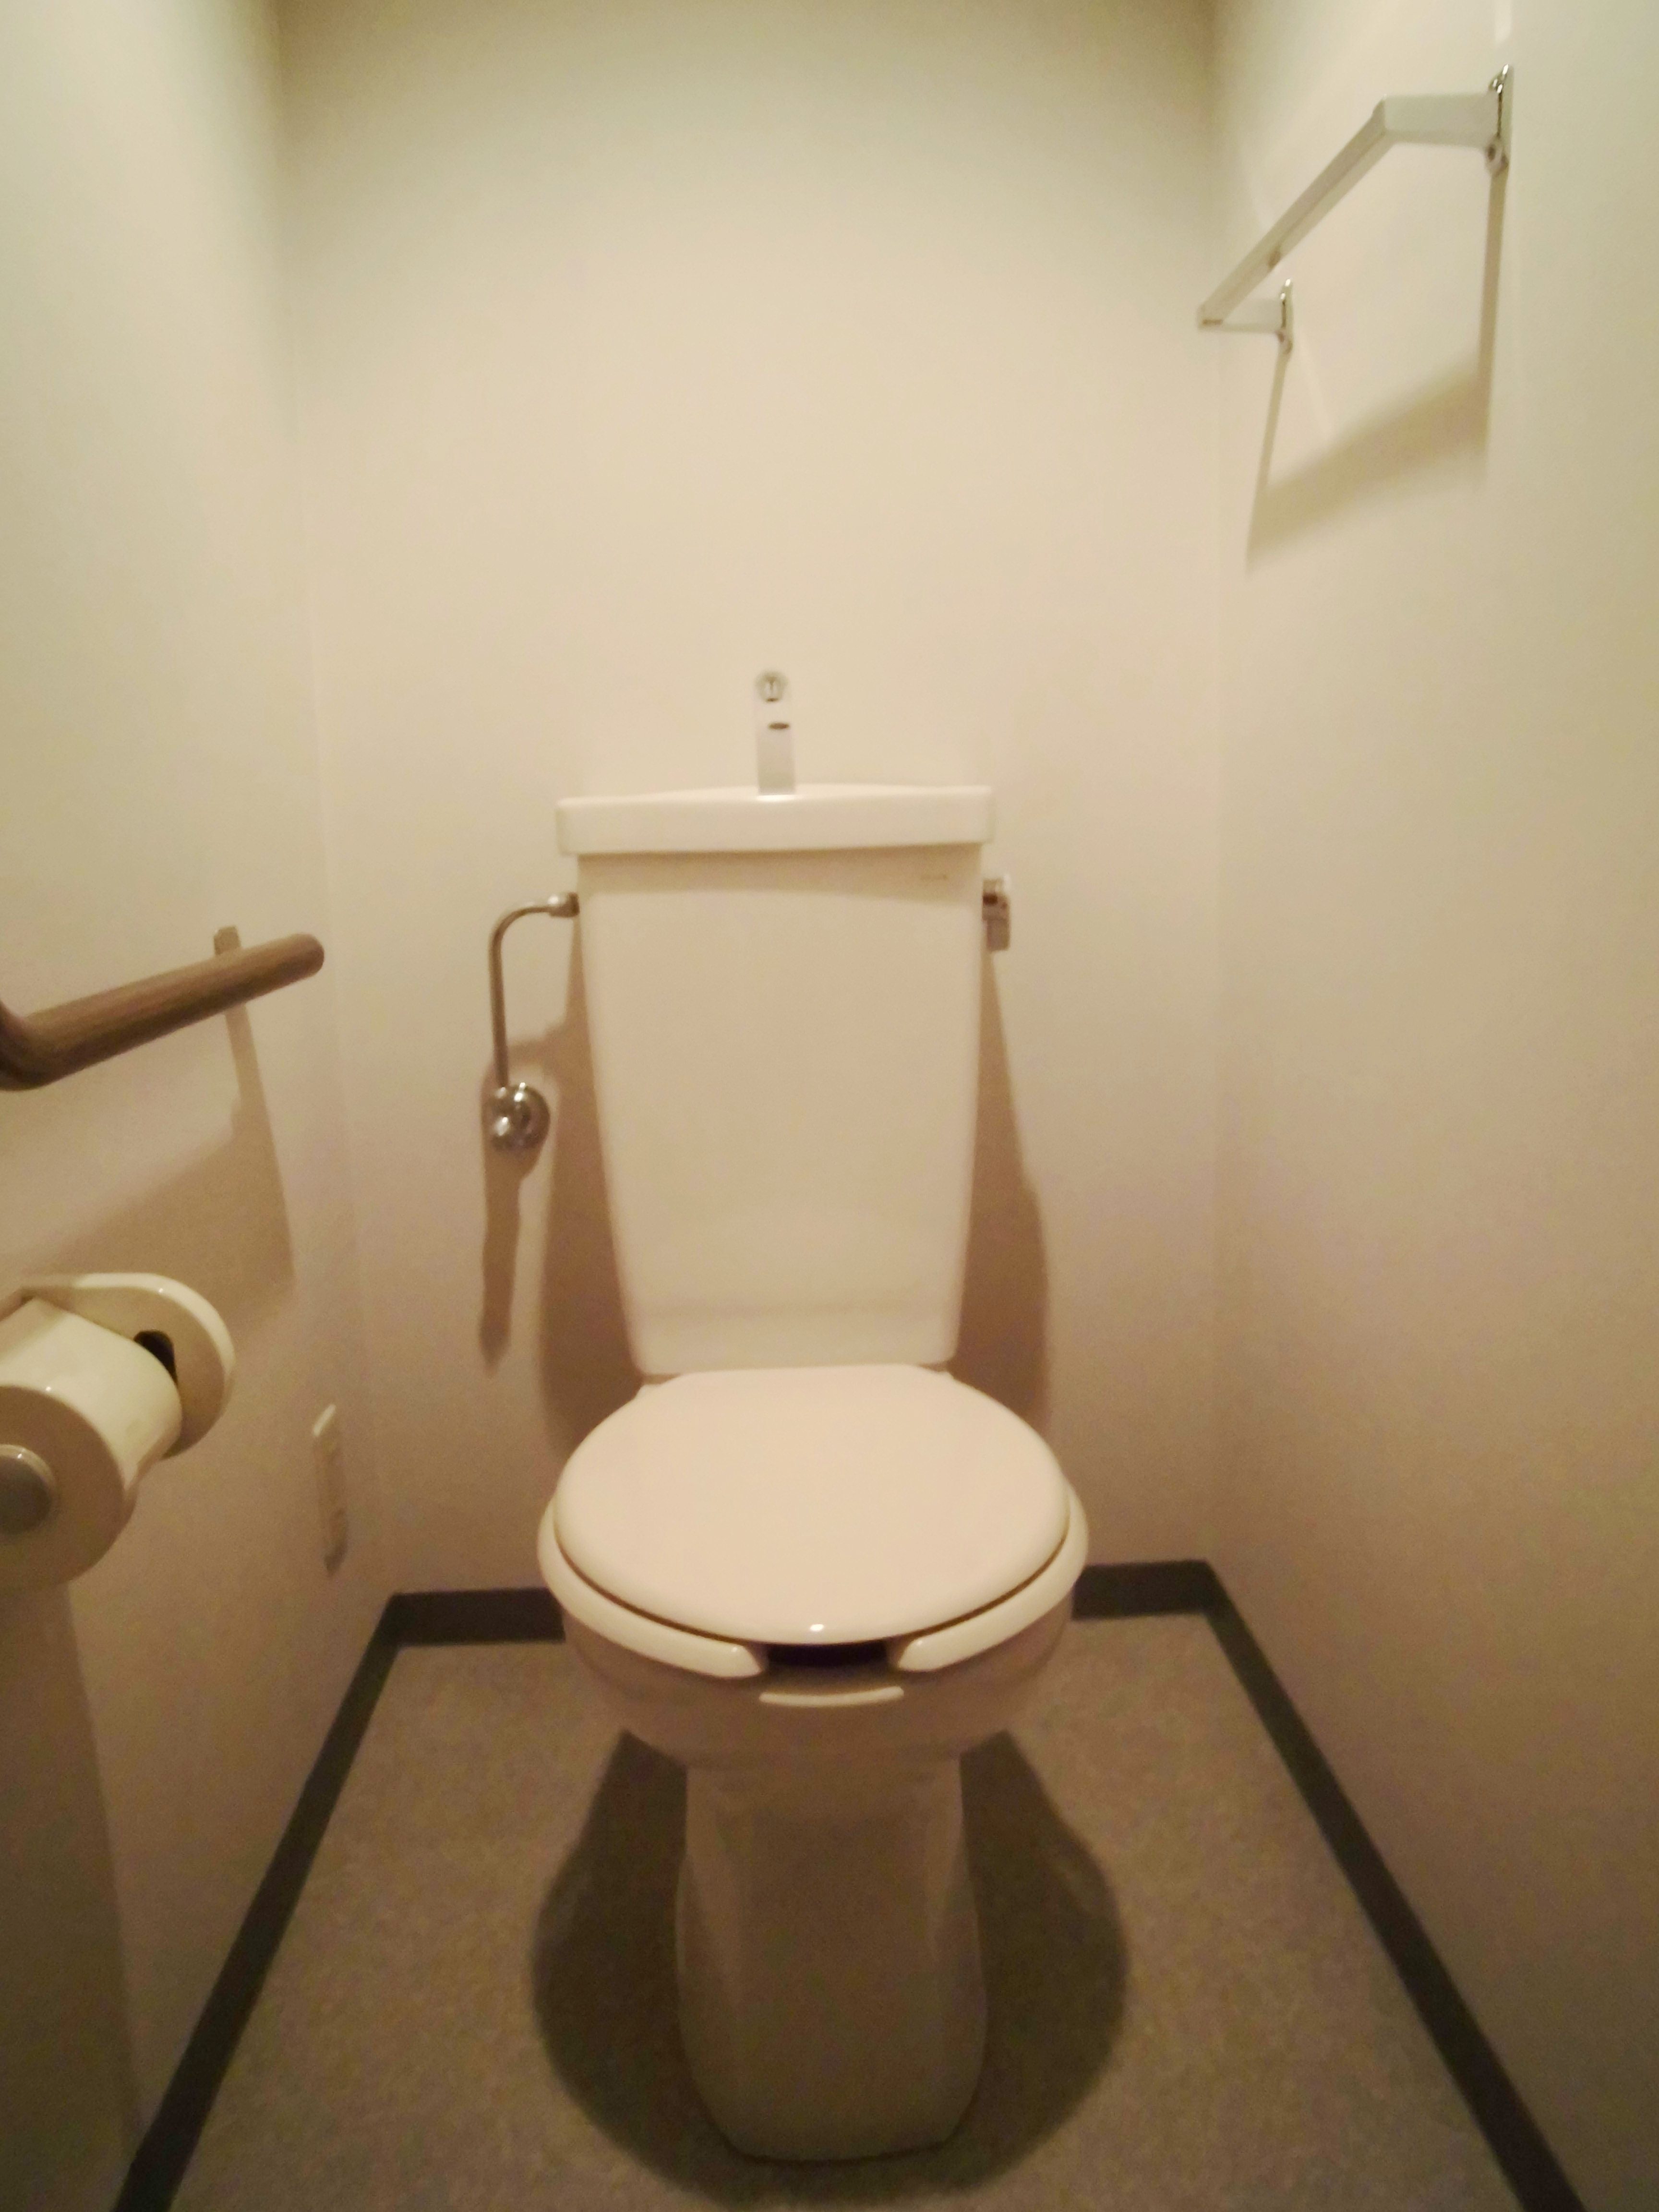 Toilet. Image is another dwelling unit of the same type